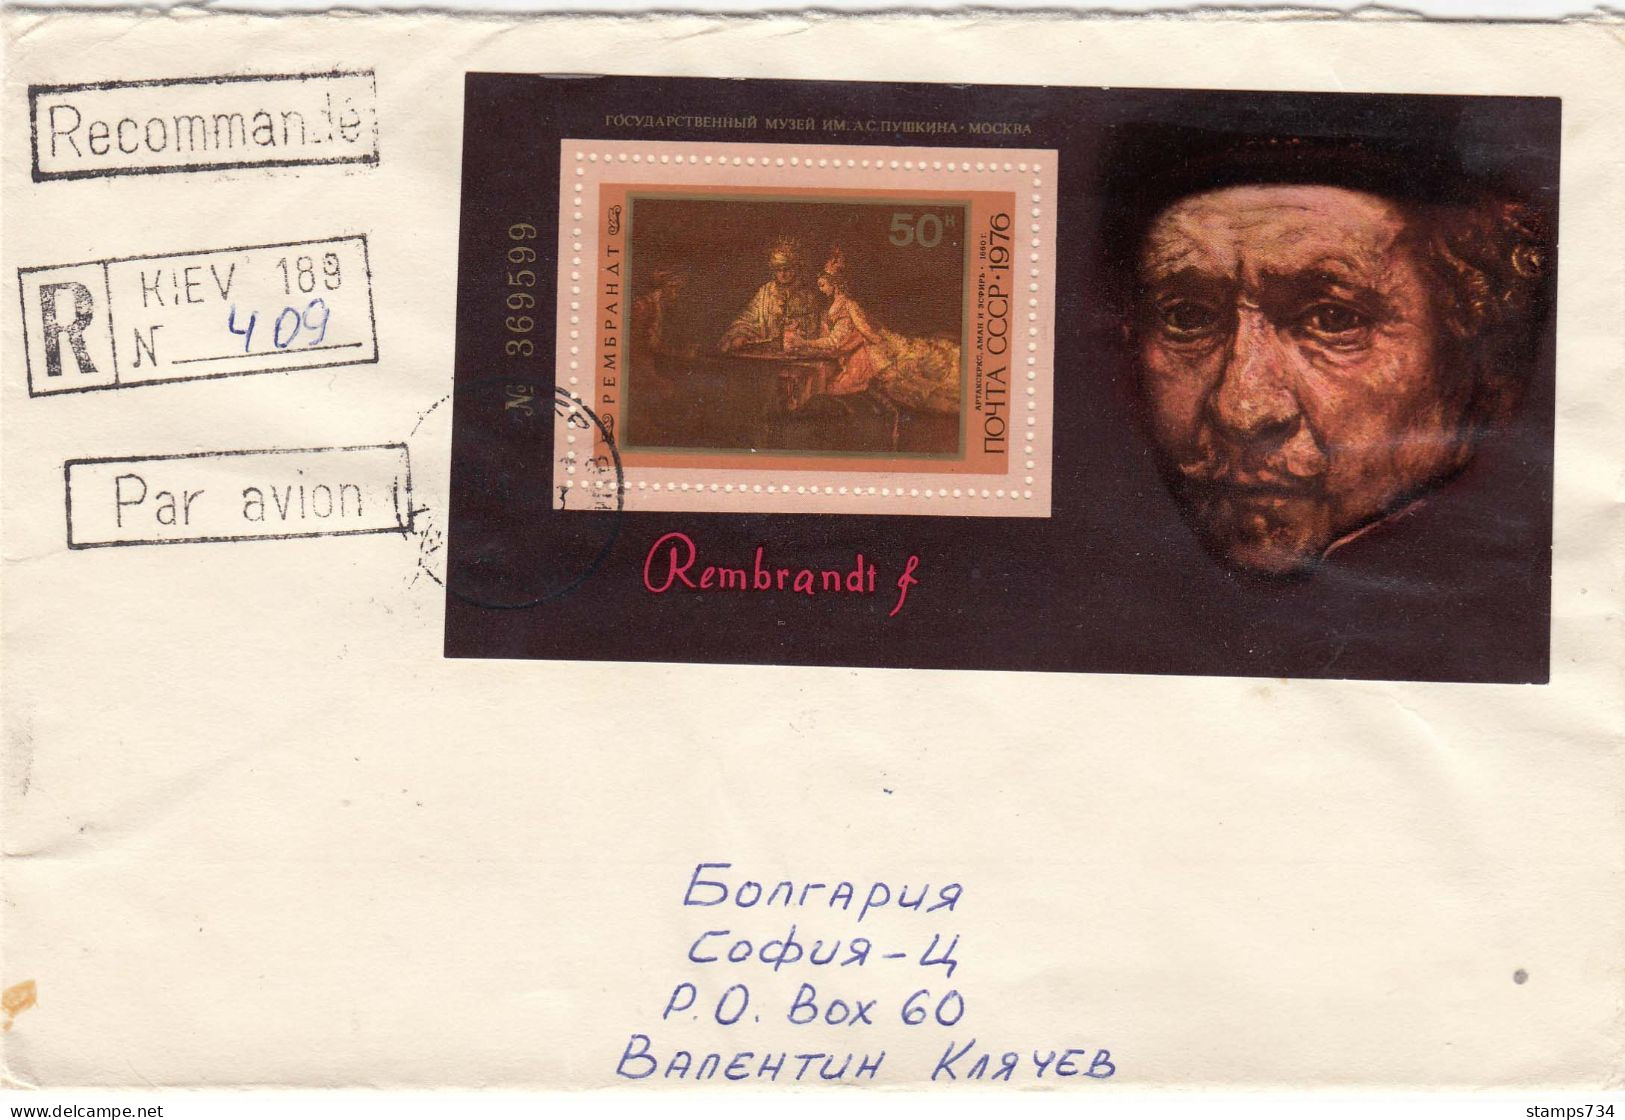 USSR- 003/1976 - Rembrandt, Mi-Nr. Block 116, R-Letter+air Mail From USSR To Sofia/Bulgaria - Rembrandt